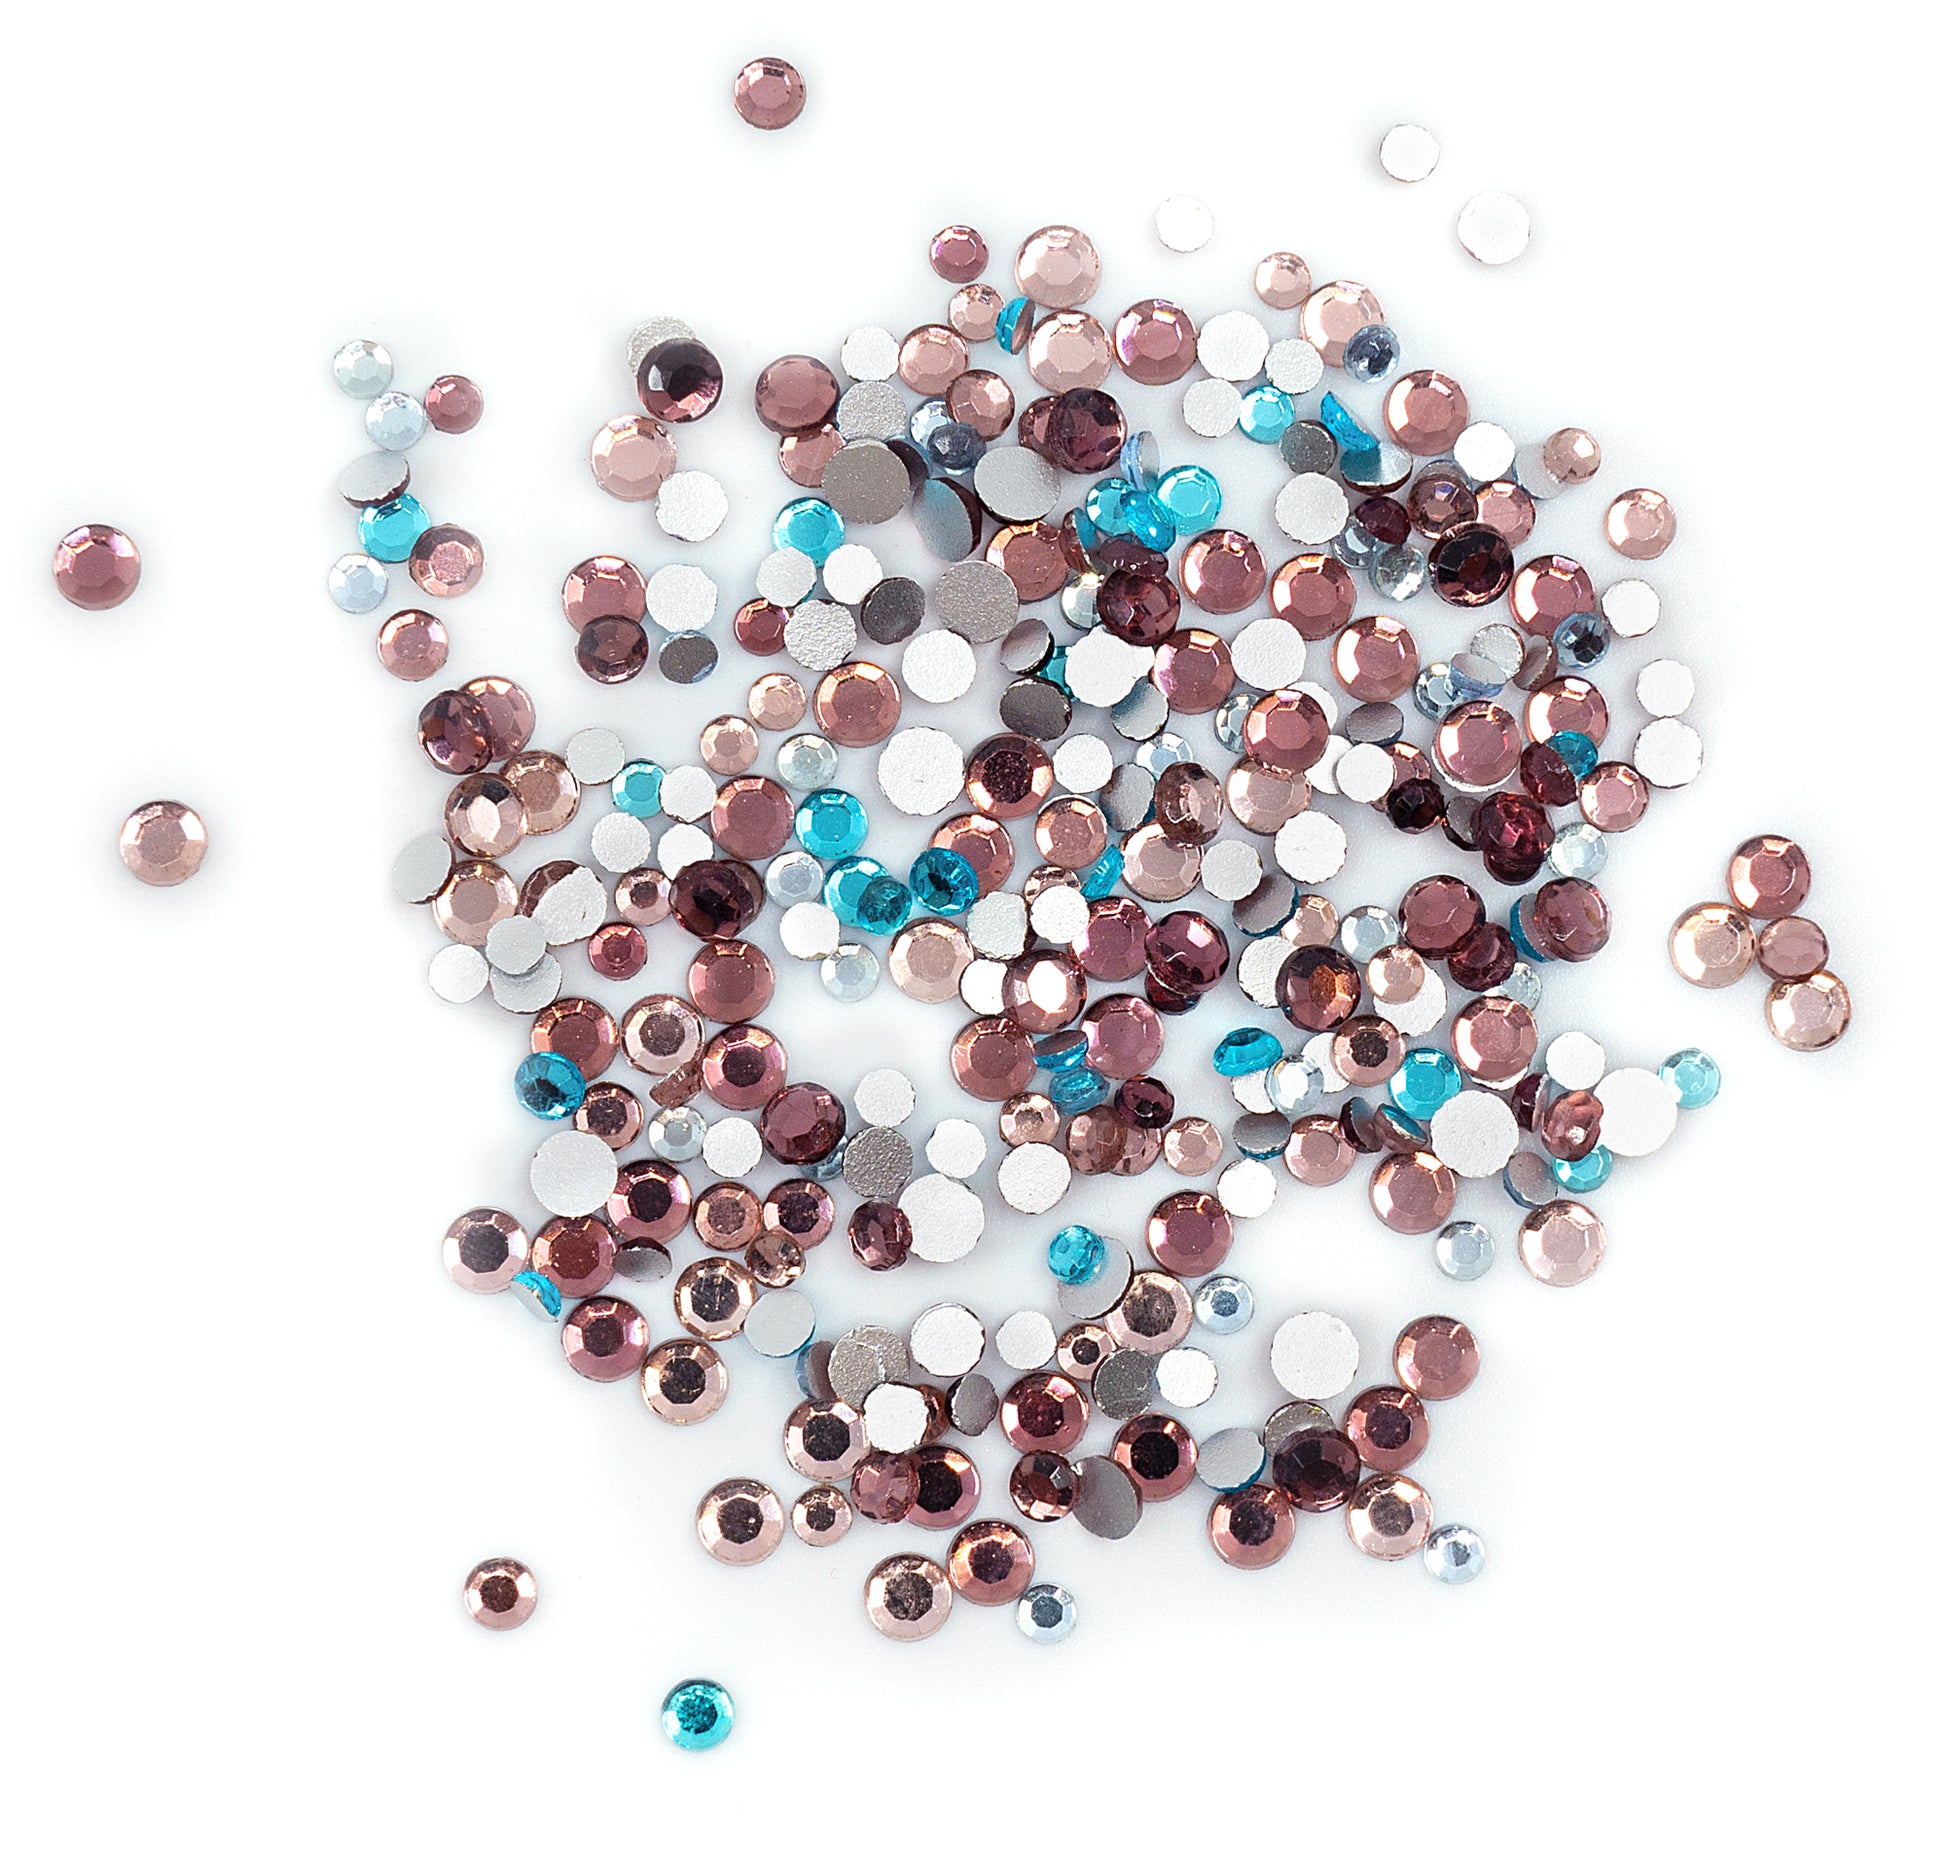 Surprise Mix of Small Flat Back Glass Rhinestone Crystals approx. 3-6mm (SS12-SS28) for jewelry and nail design